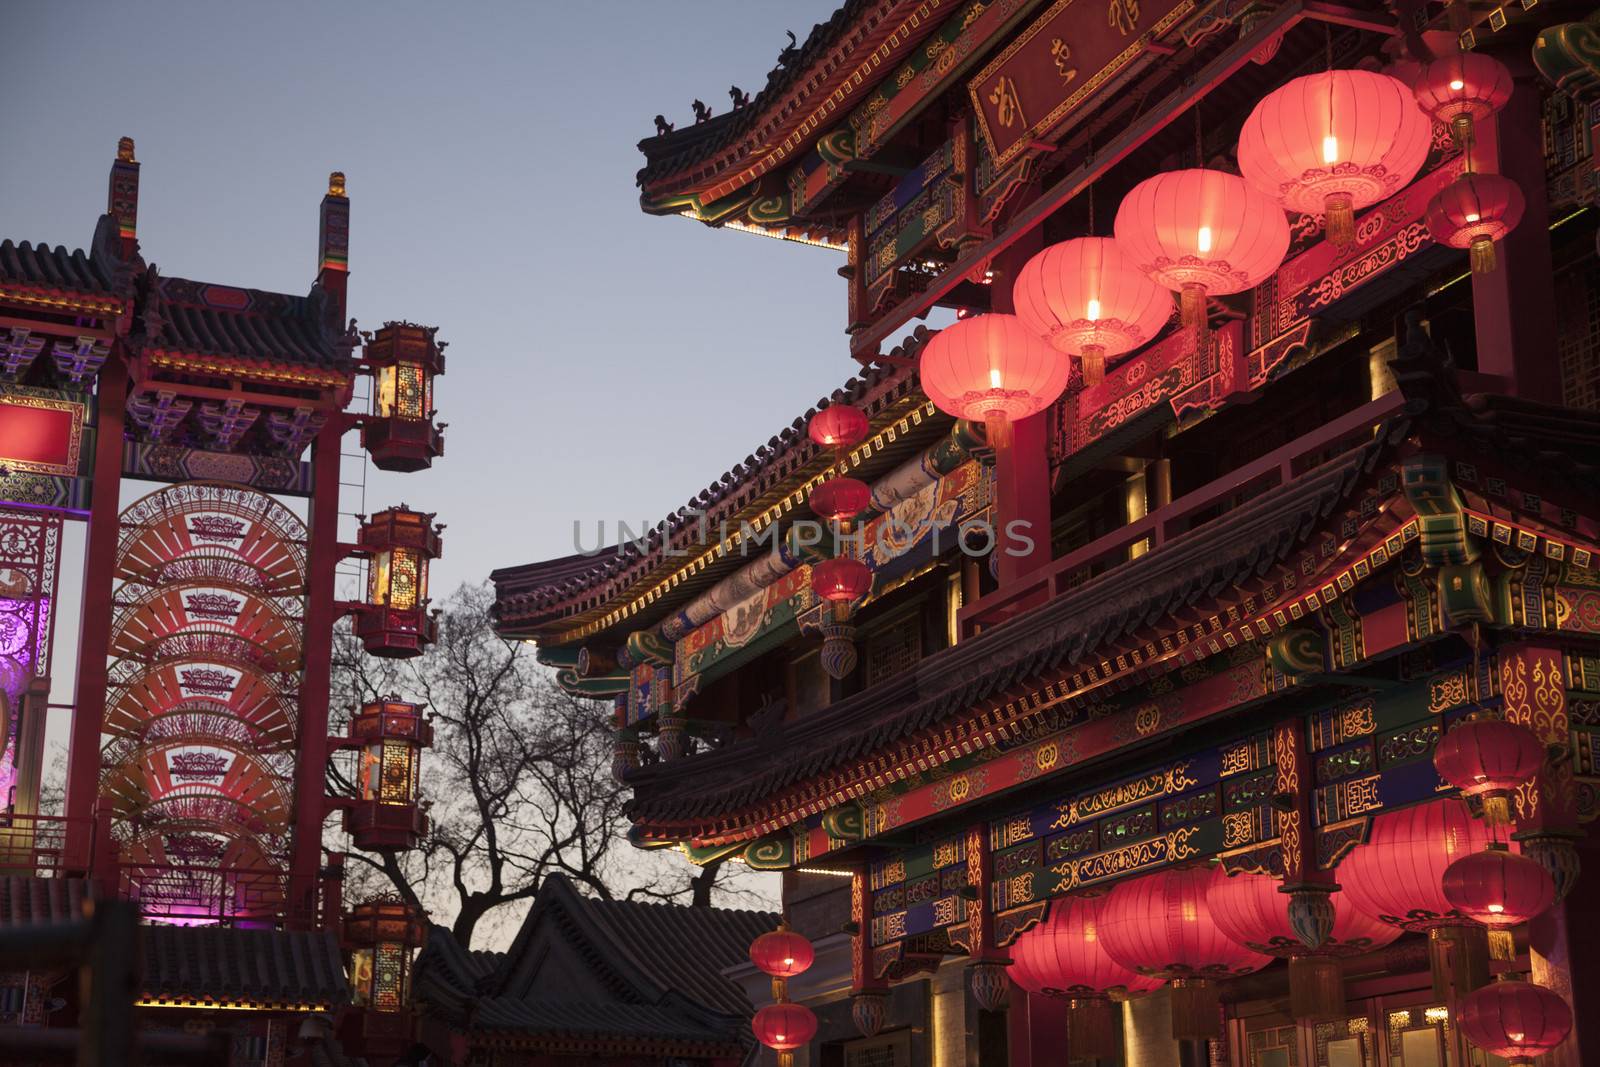 Traditional Chinese buildings illuminated at dusk in Beijing, China